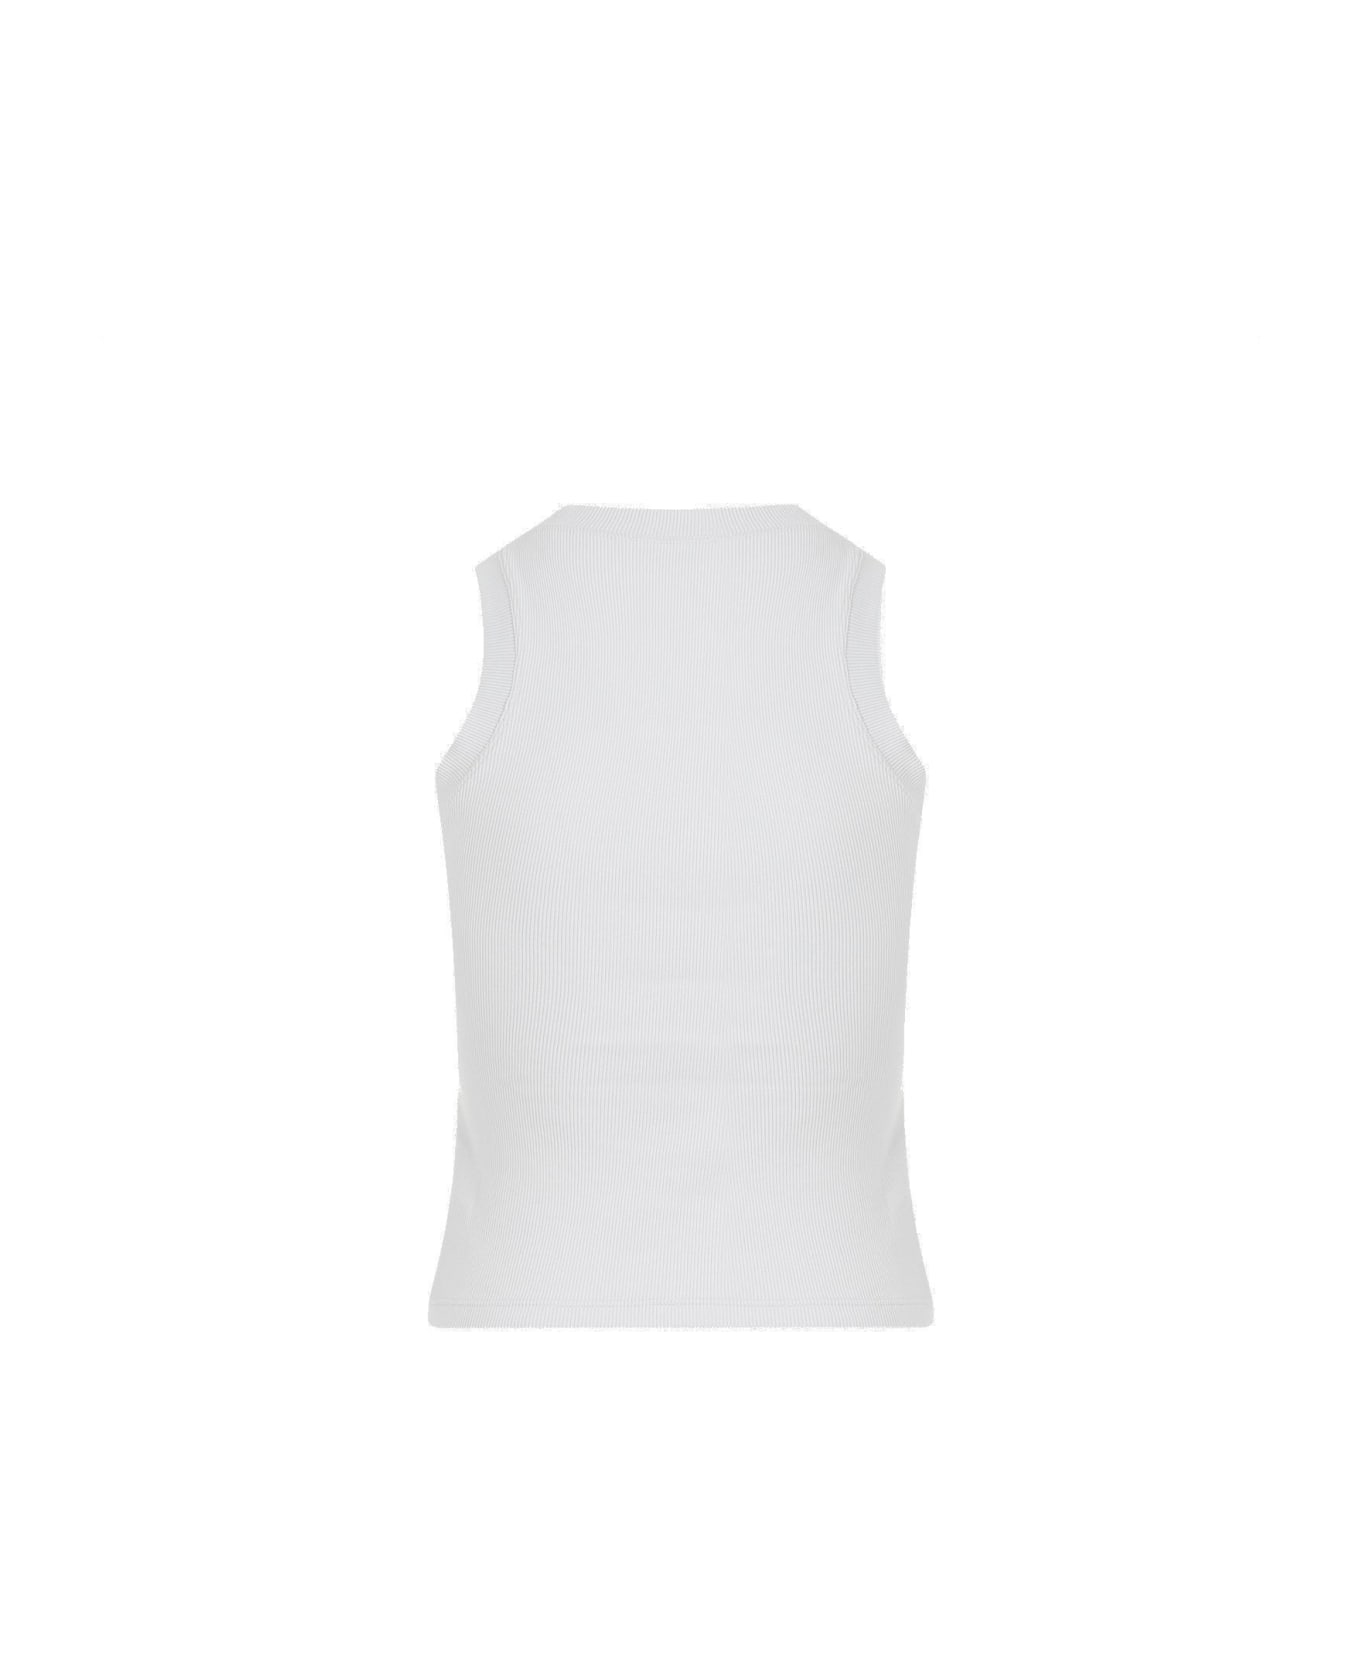 Off-White Logo Embroidered Sleeveless Top - ARTIC ICE ARTIC ICE